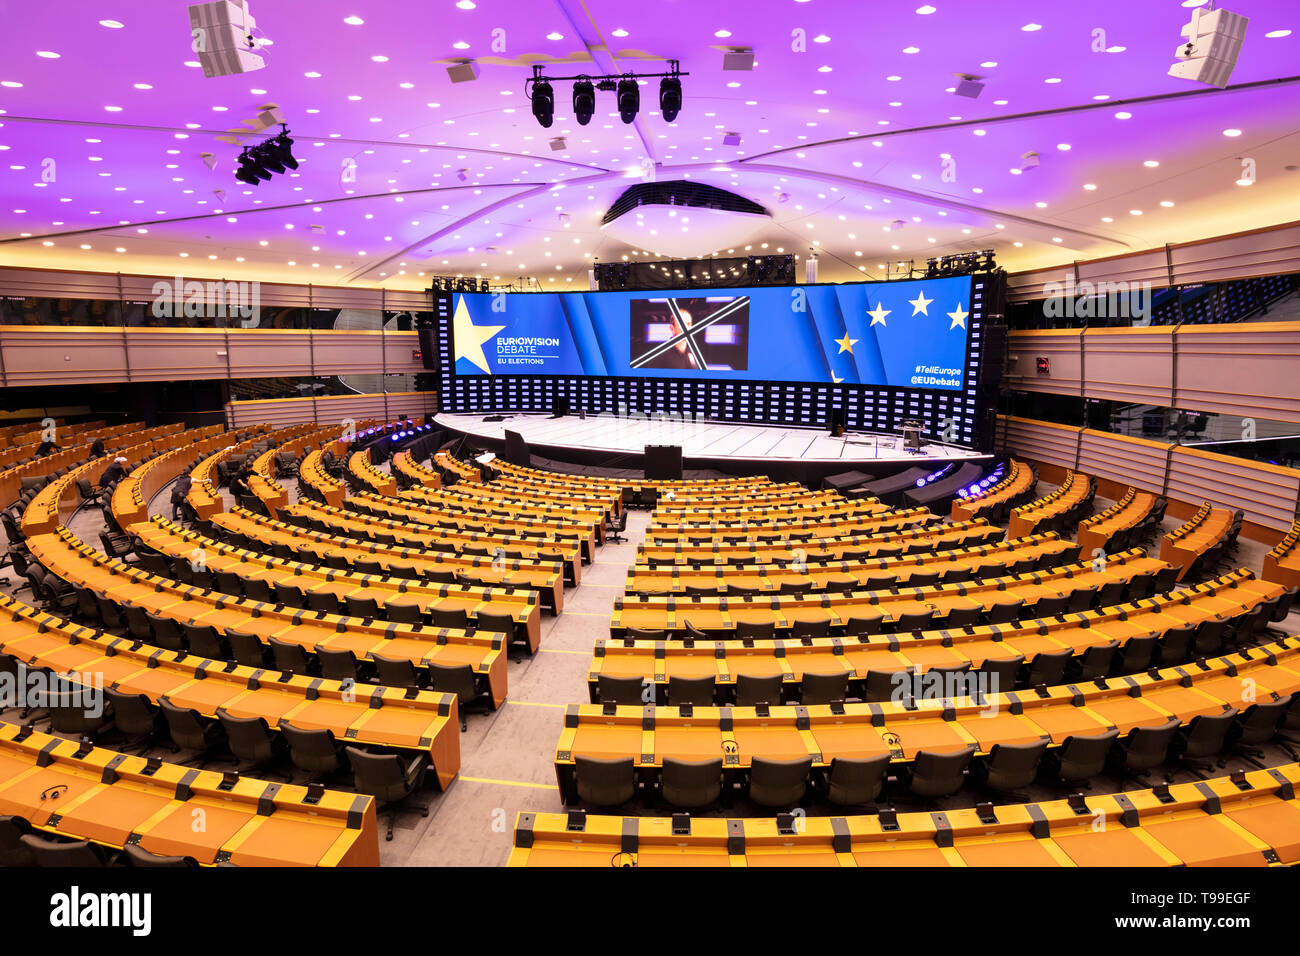 The hemicycle interior or eu parliament chamber, plenary chamber, gallery of the European Parliament building Brussels Belgium Eu Europe Stock Photo